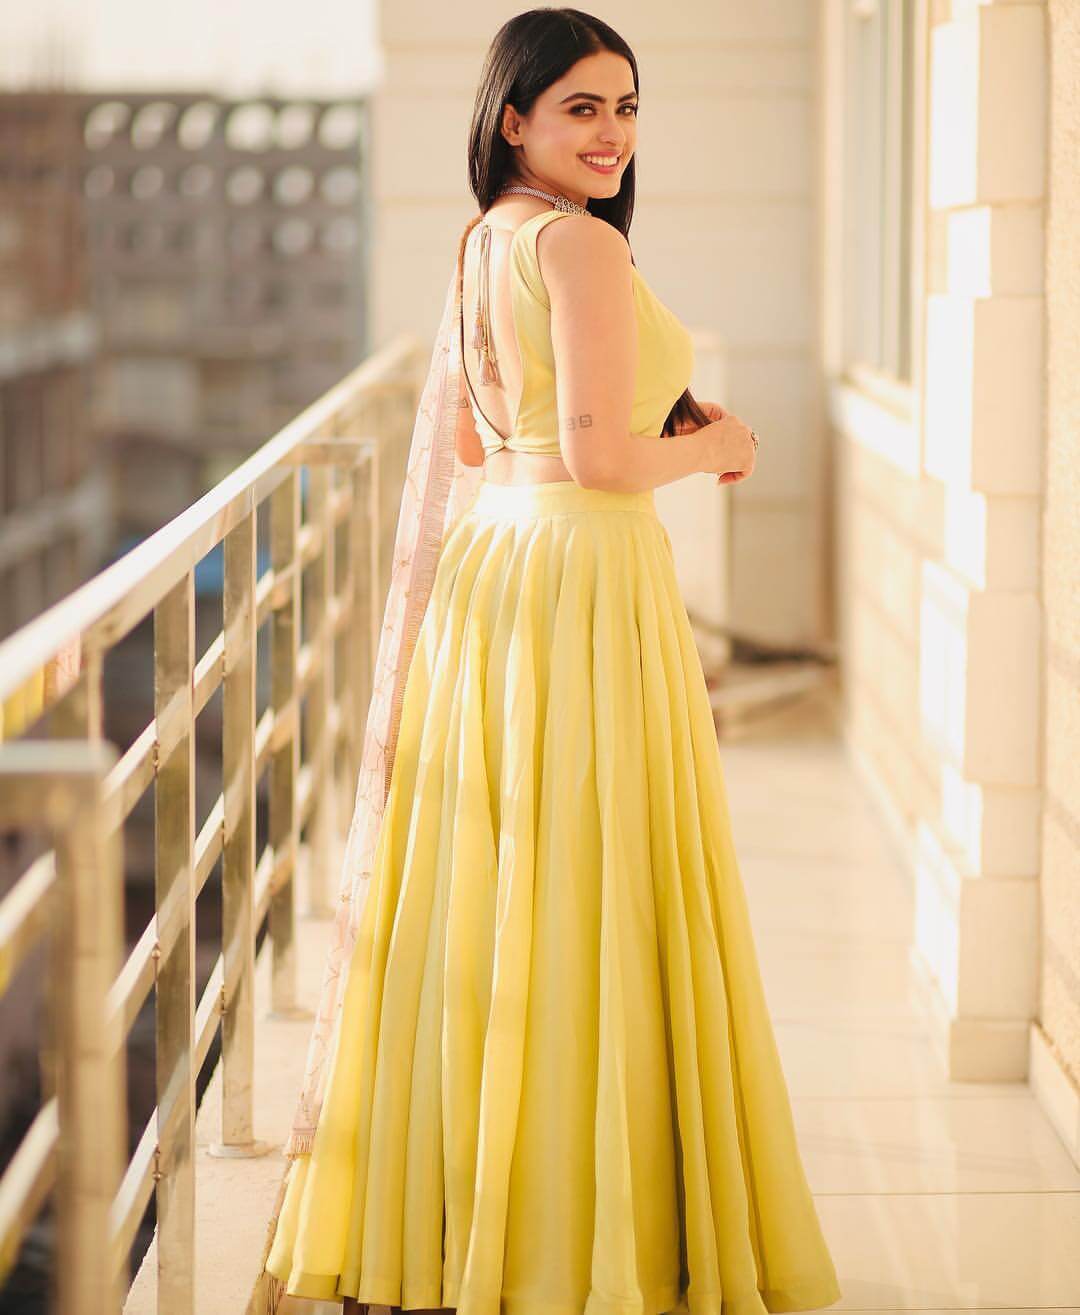 Simi Chahal Look Classy In Yellow Lehenga Outfit